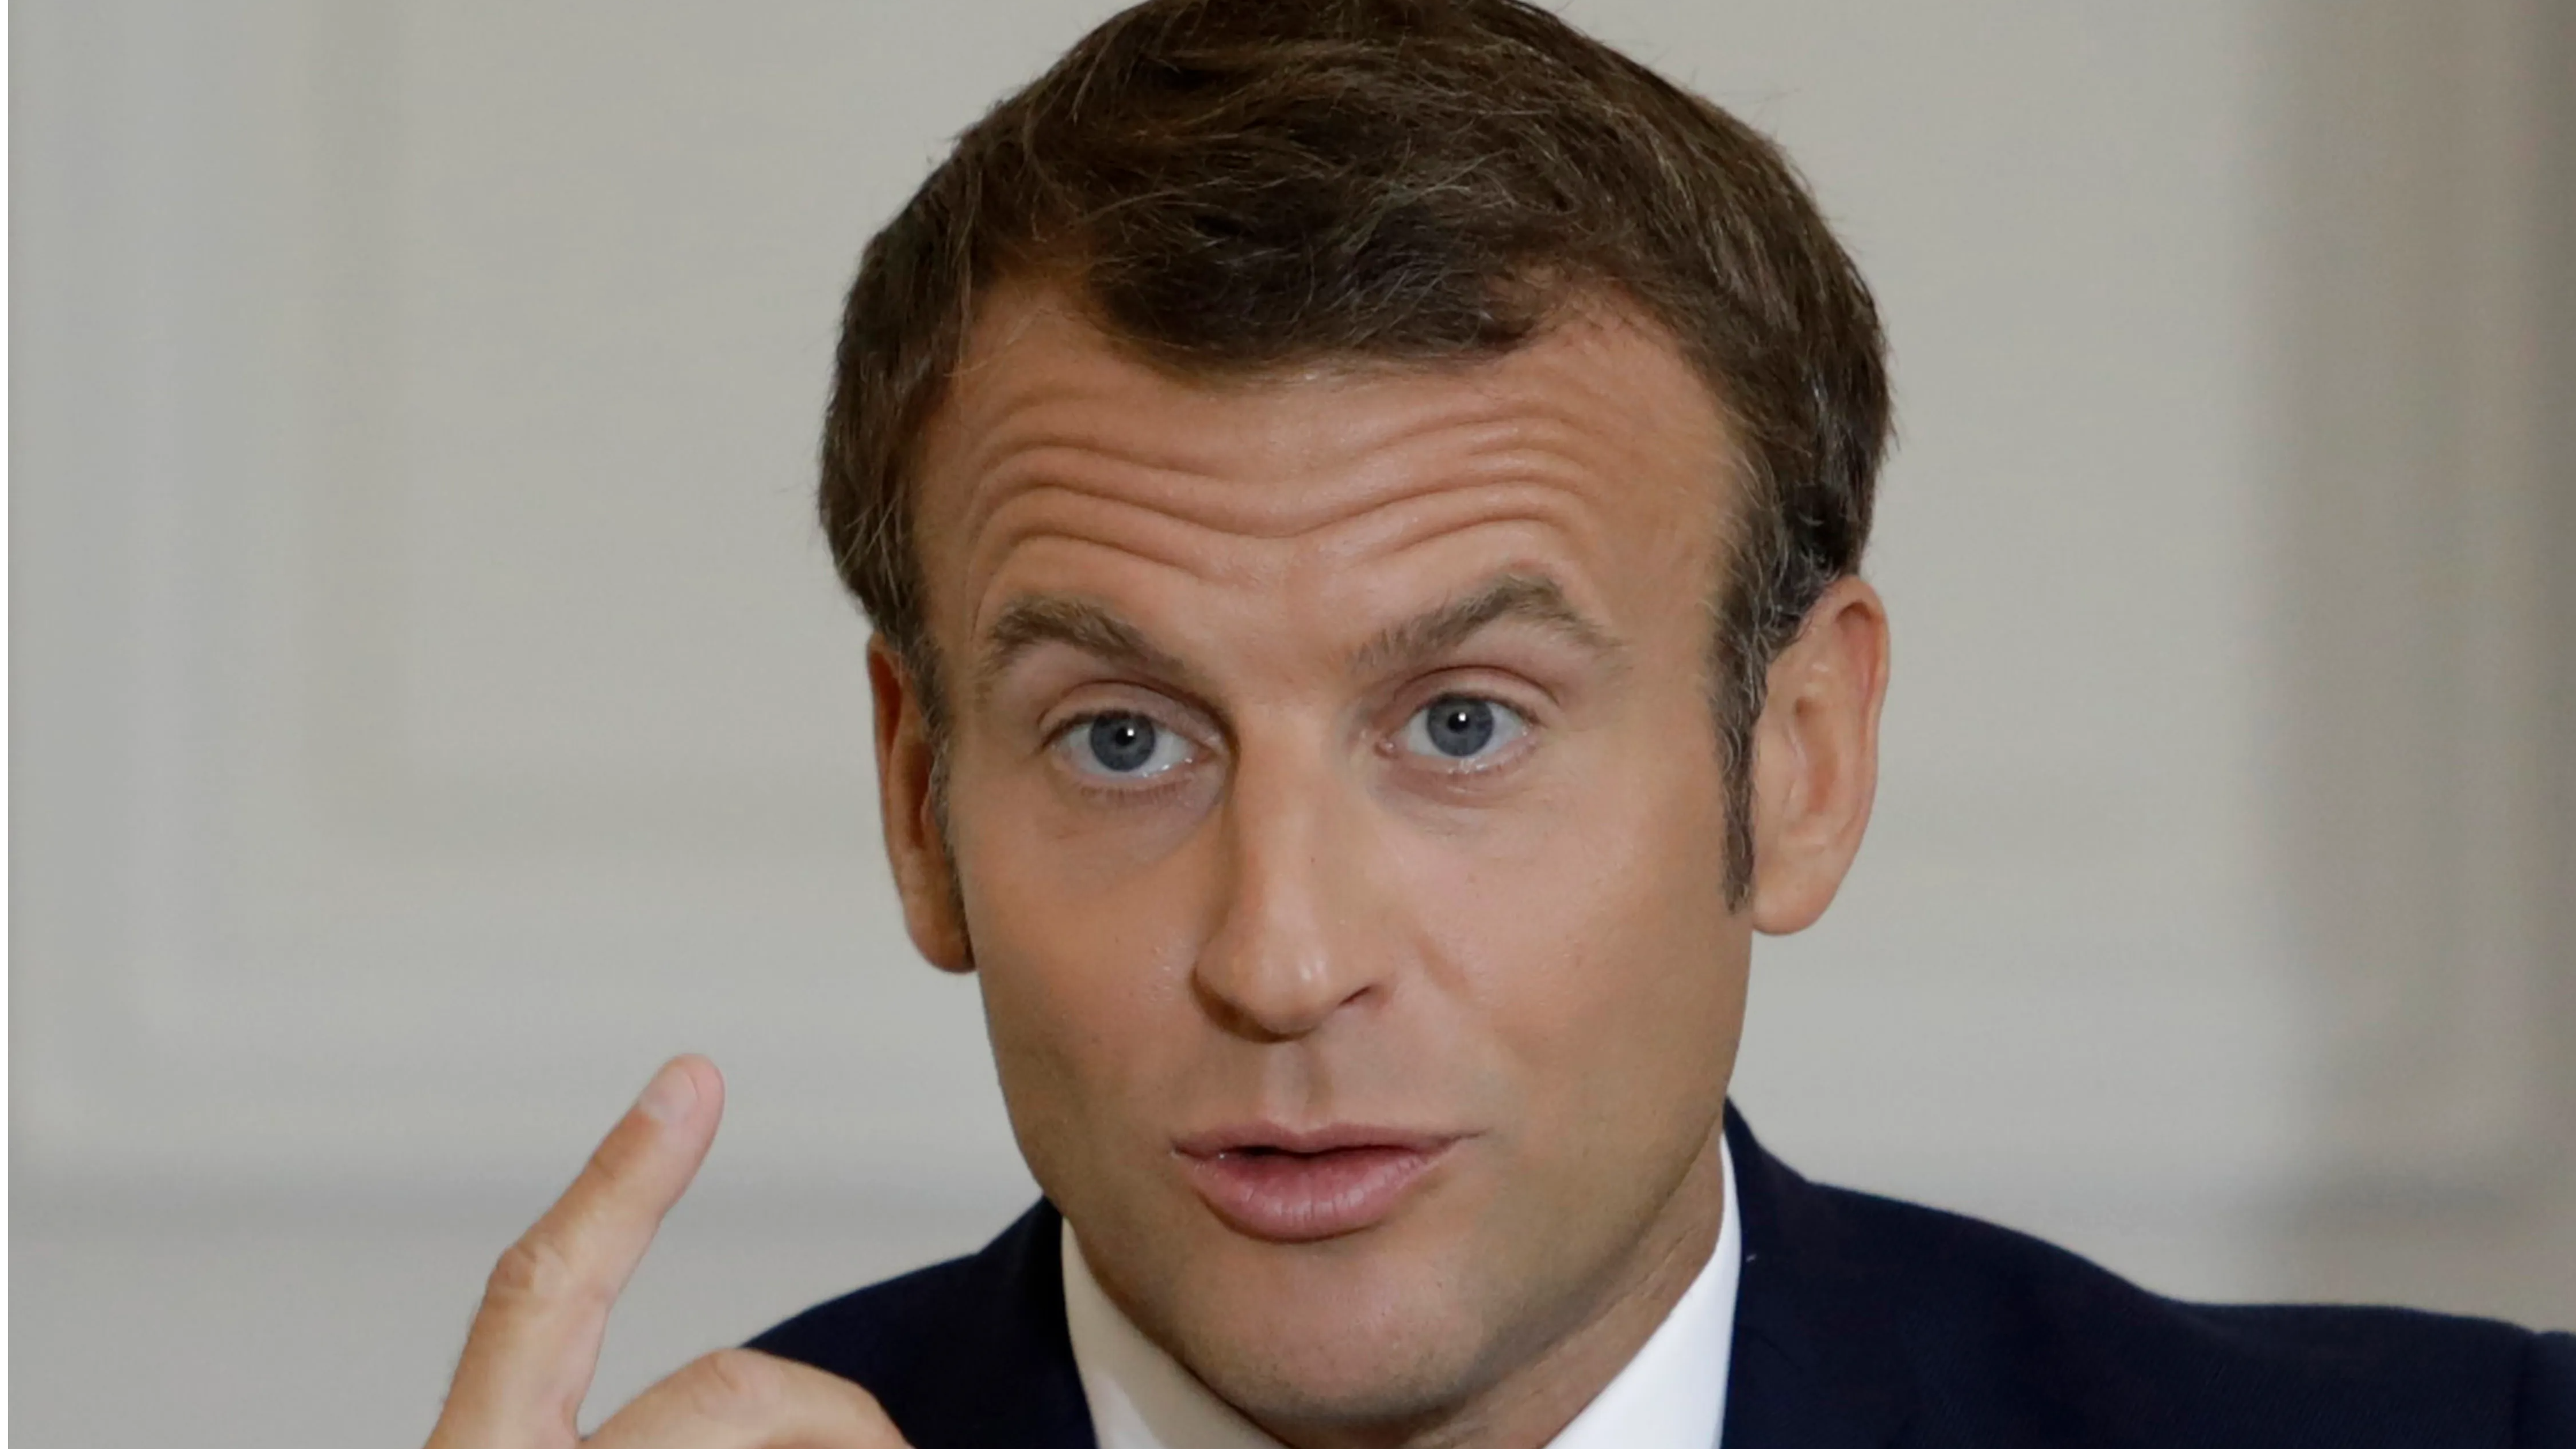 Emmanuel Macron to continue to greet crowd despite being slapped